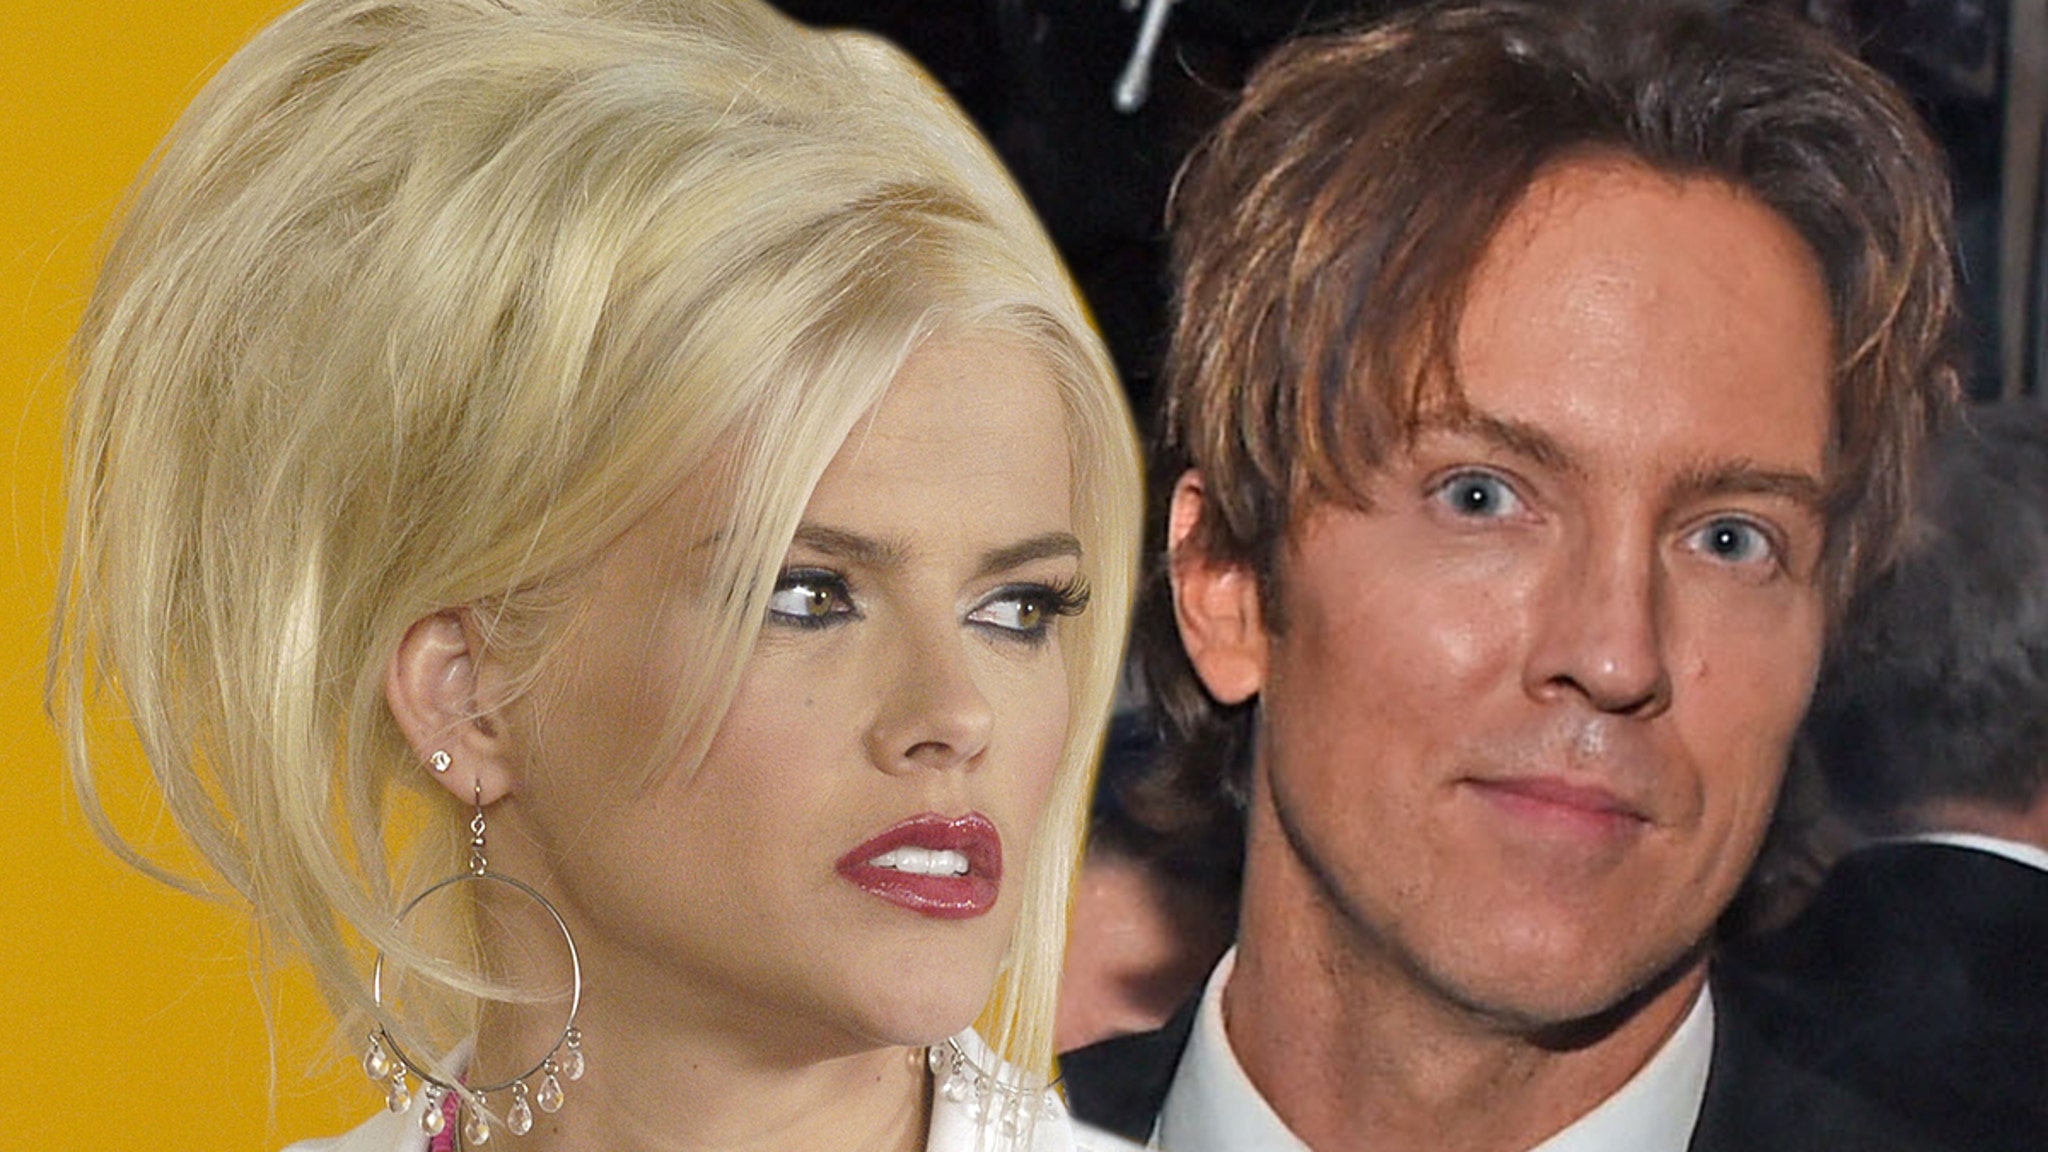 Larry Birkhead, Anna Nicole Smith's ex, is apprehensive about Biopic thumbnail